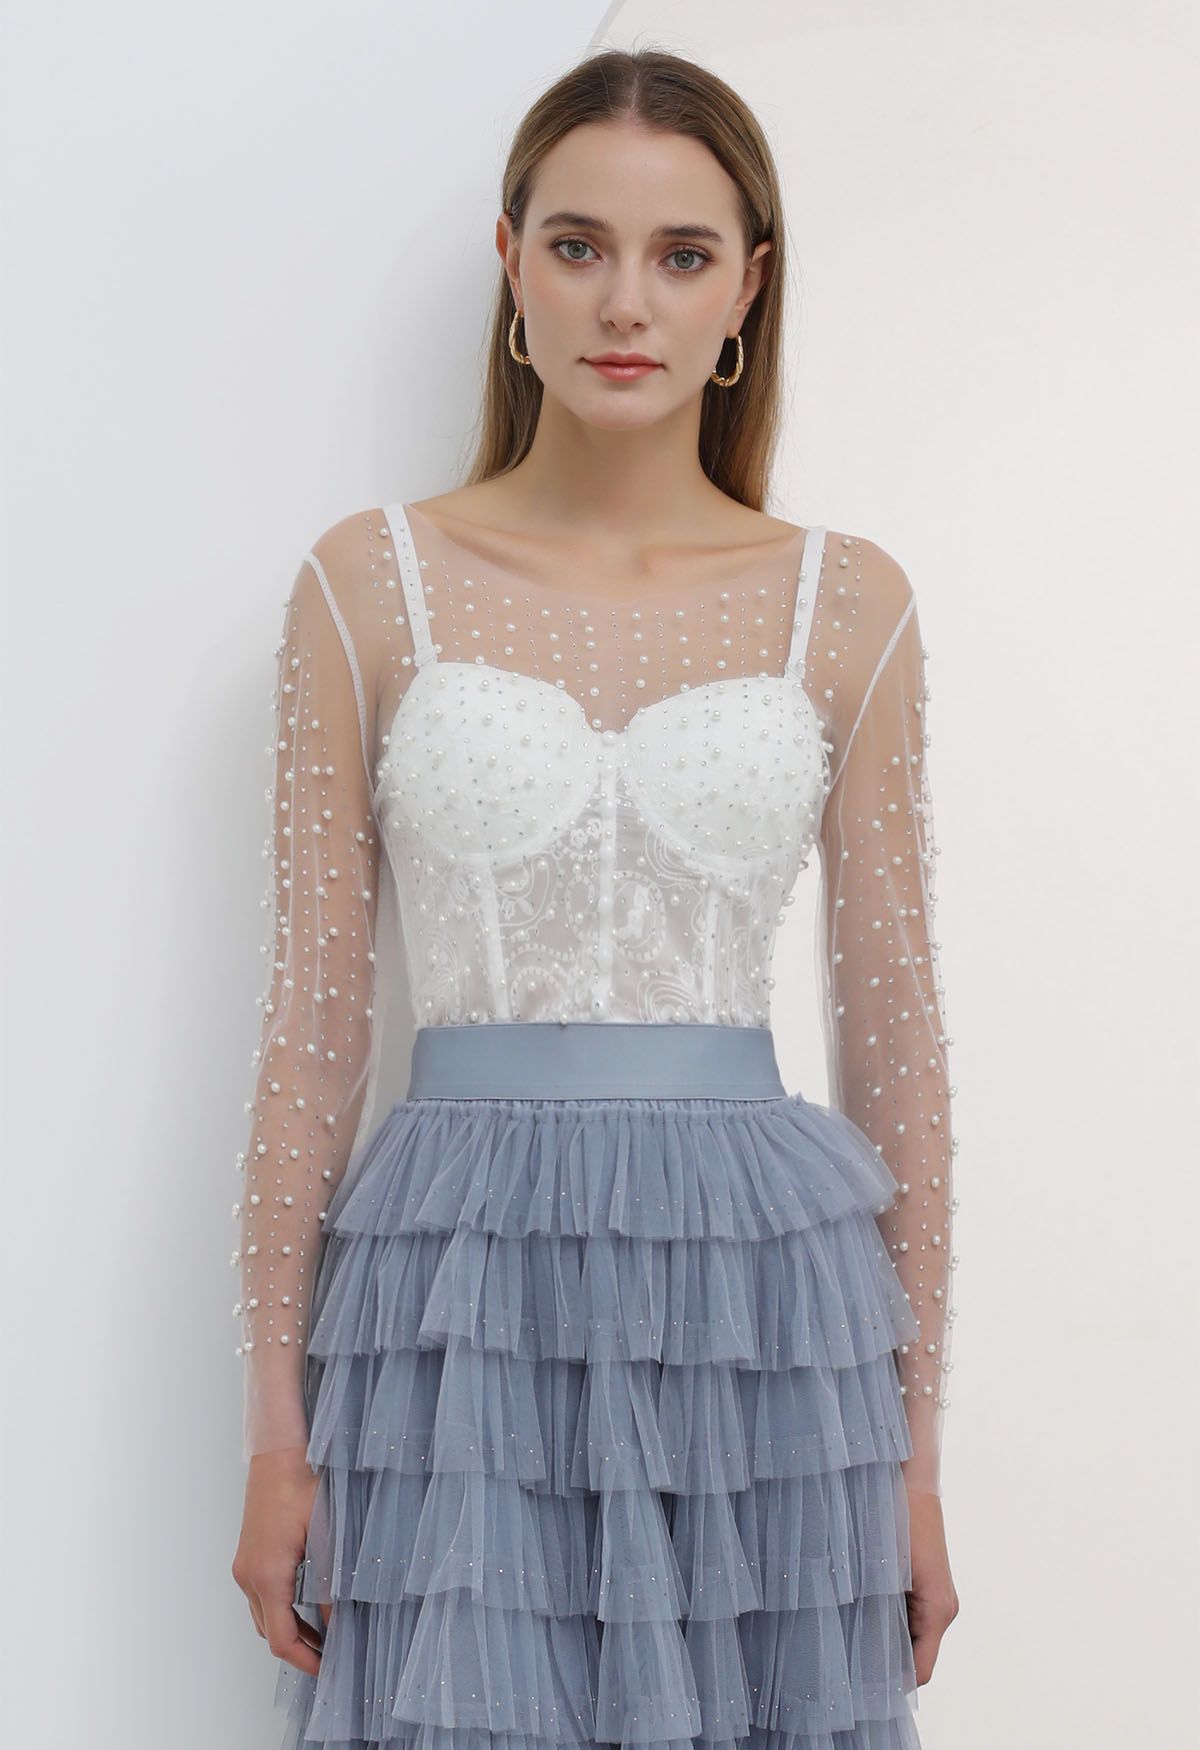 Full Pearl Embellished Sheer Mesh Top in White | Chicwish